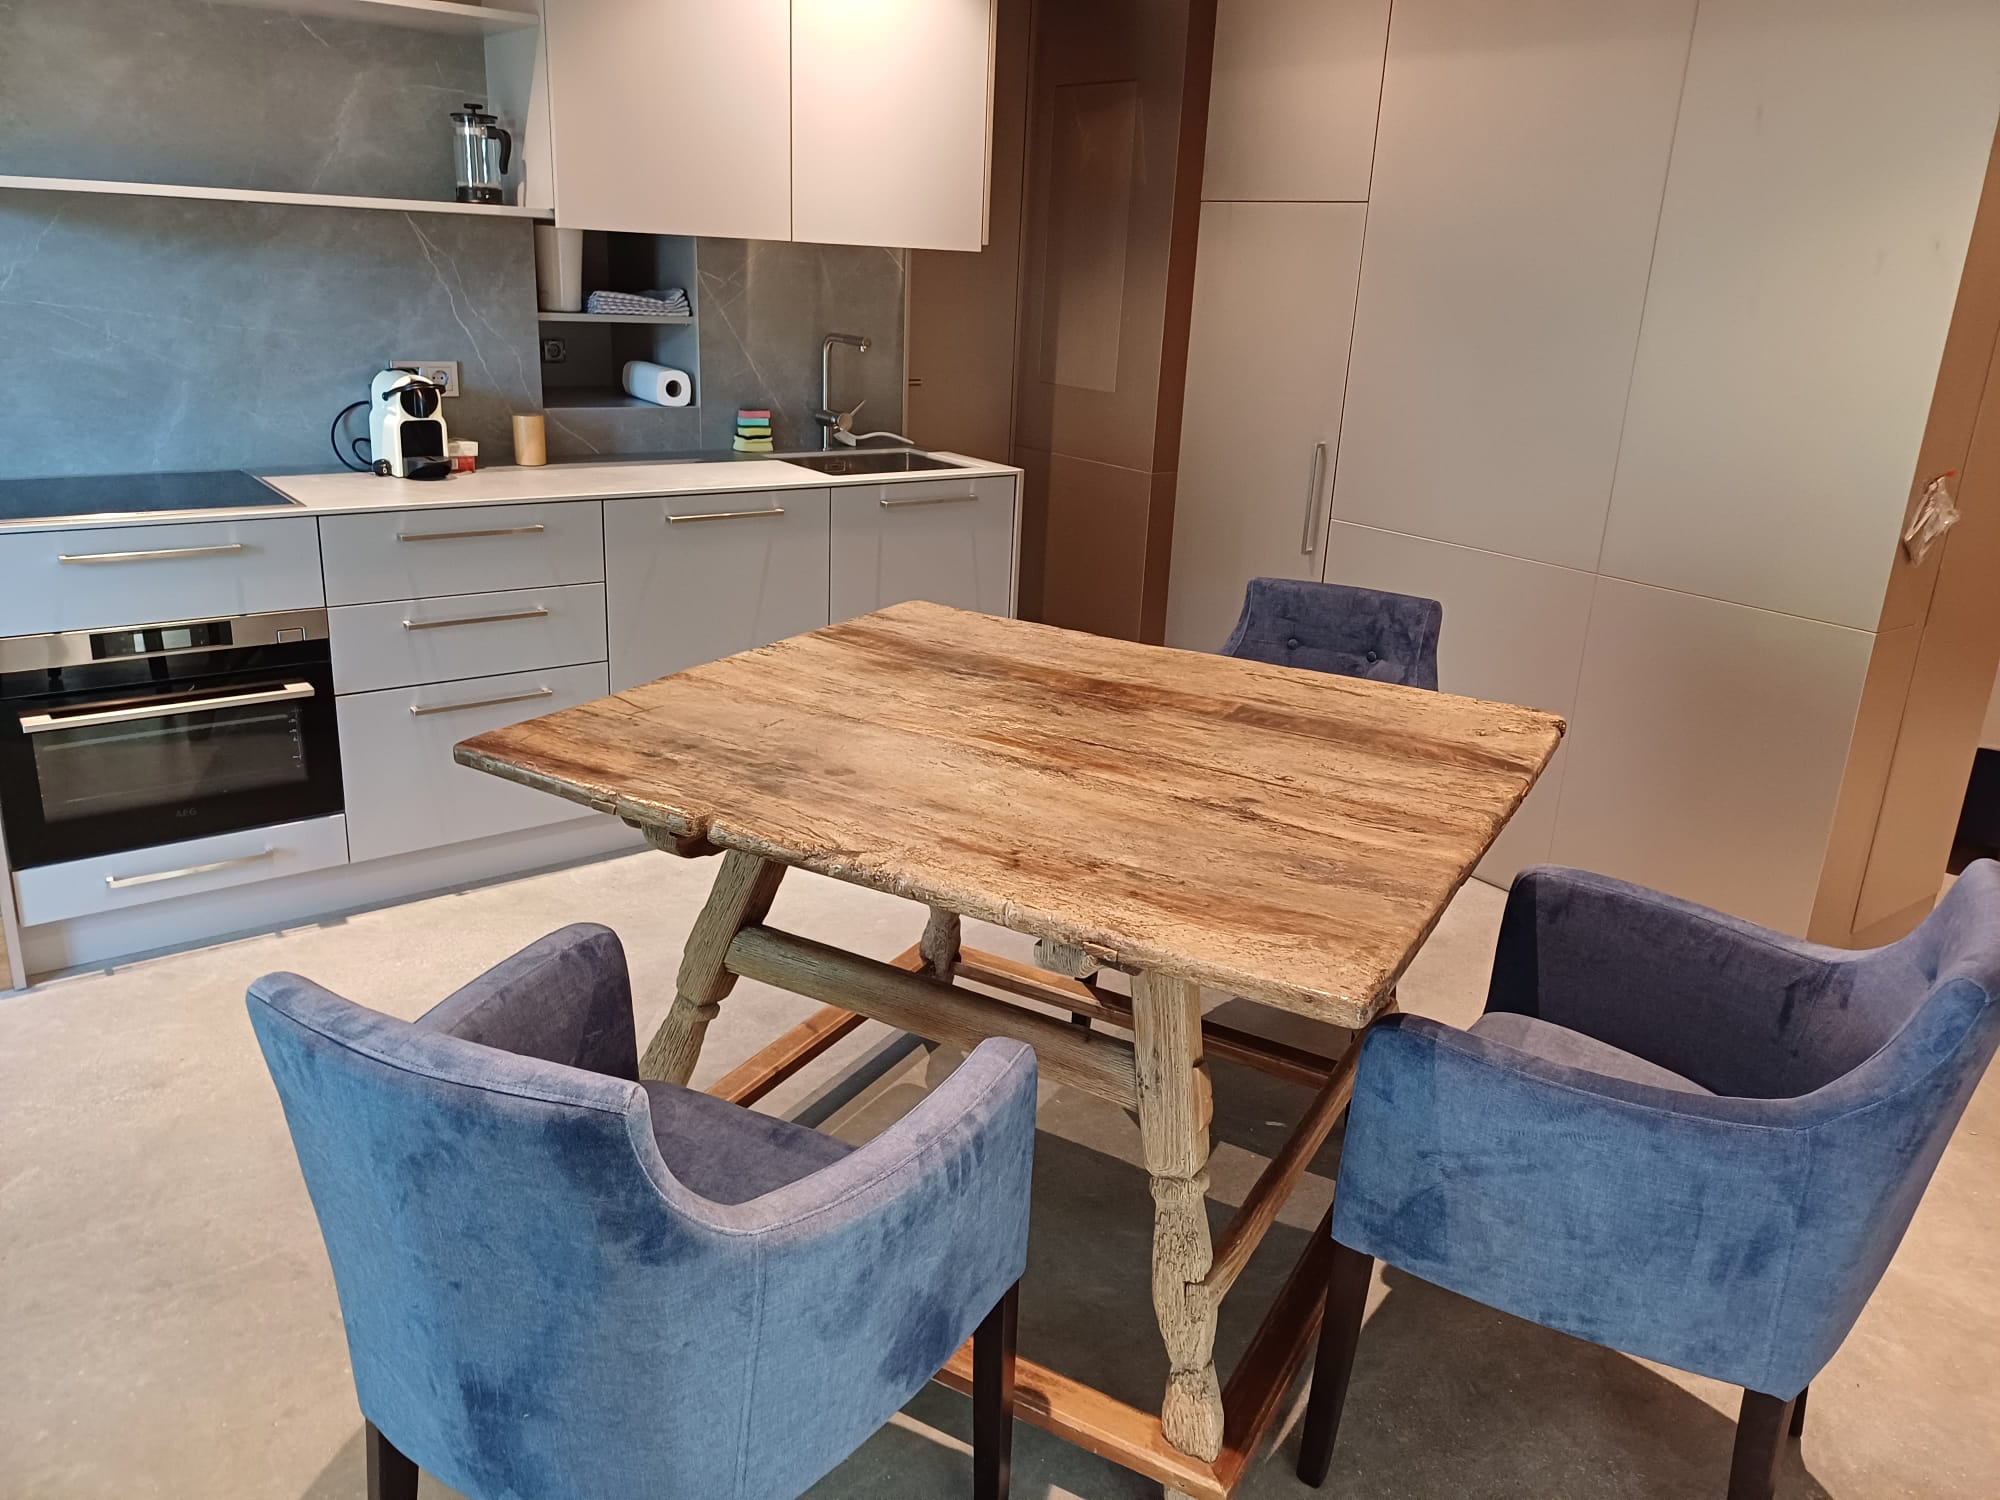 Eating table with 3 chairs next to a modern kitchen